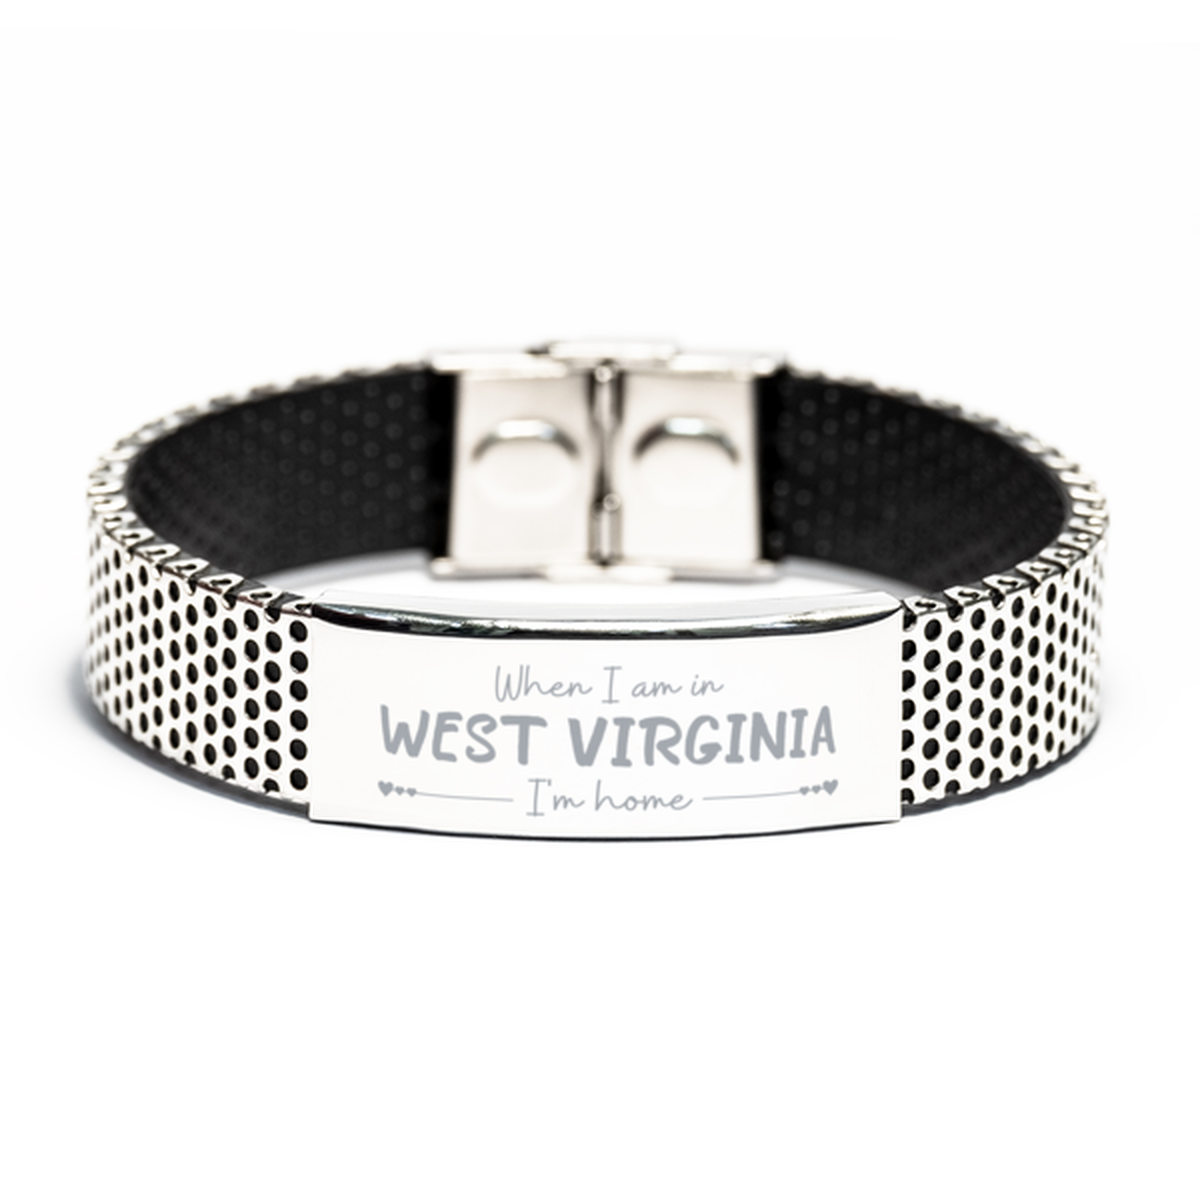 When I am in West Virginia I'm home Stainless Steel Bracelet, Cheap Gifts For West Virginia, State West Virginia Birthday Gifts for Friends Coworker